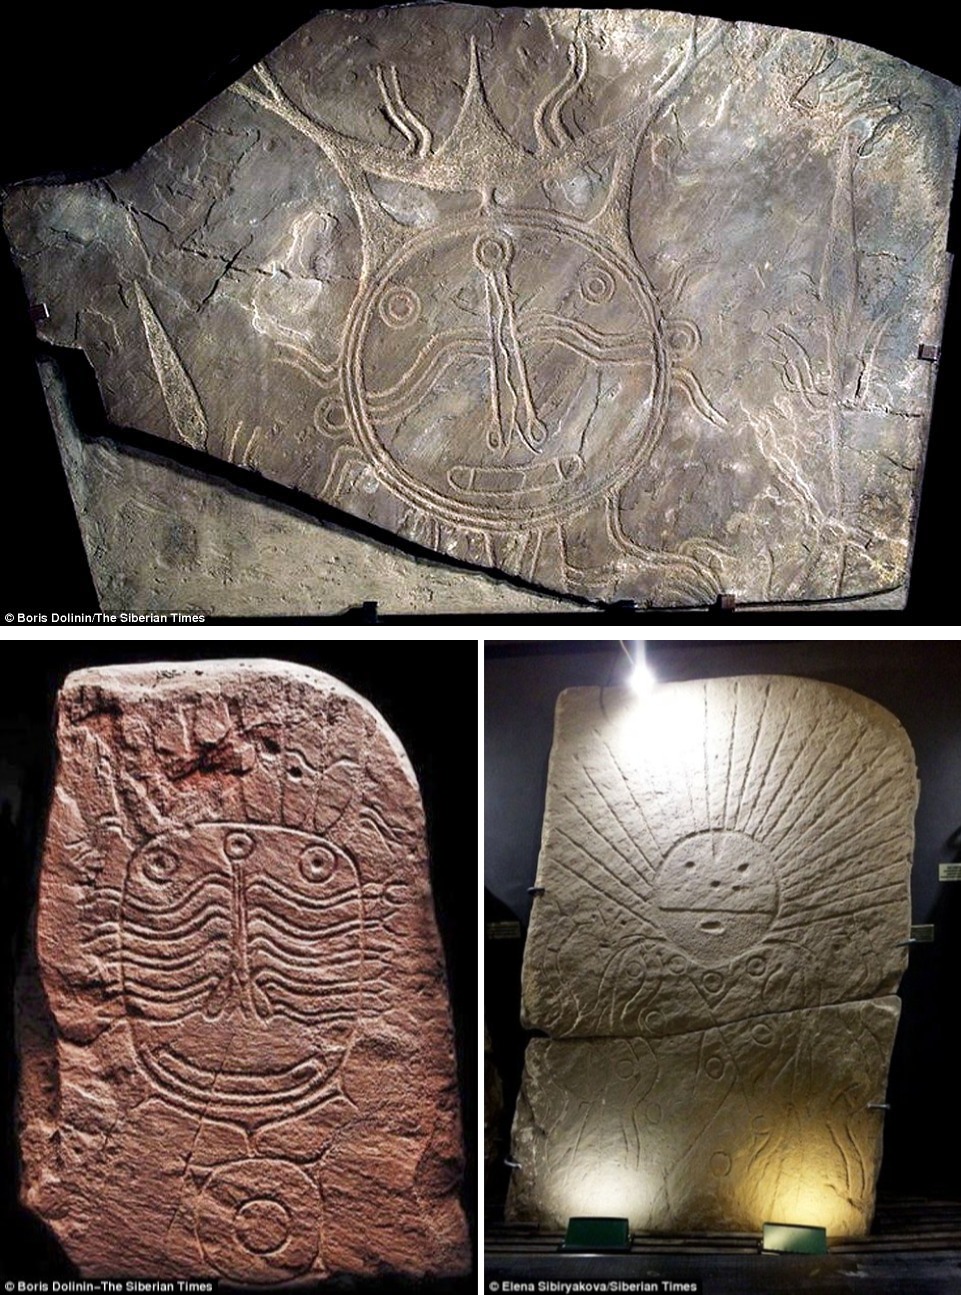 Stone stelae (up to 4 meters tall), belonging to the Okunev culture in south Siberia. Late 3rd millennium BCE-early 2nd millennium BCE, Khakassia National Museum of Local History, Russia.jpg